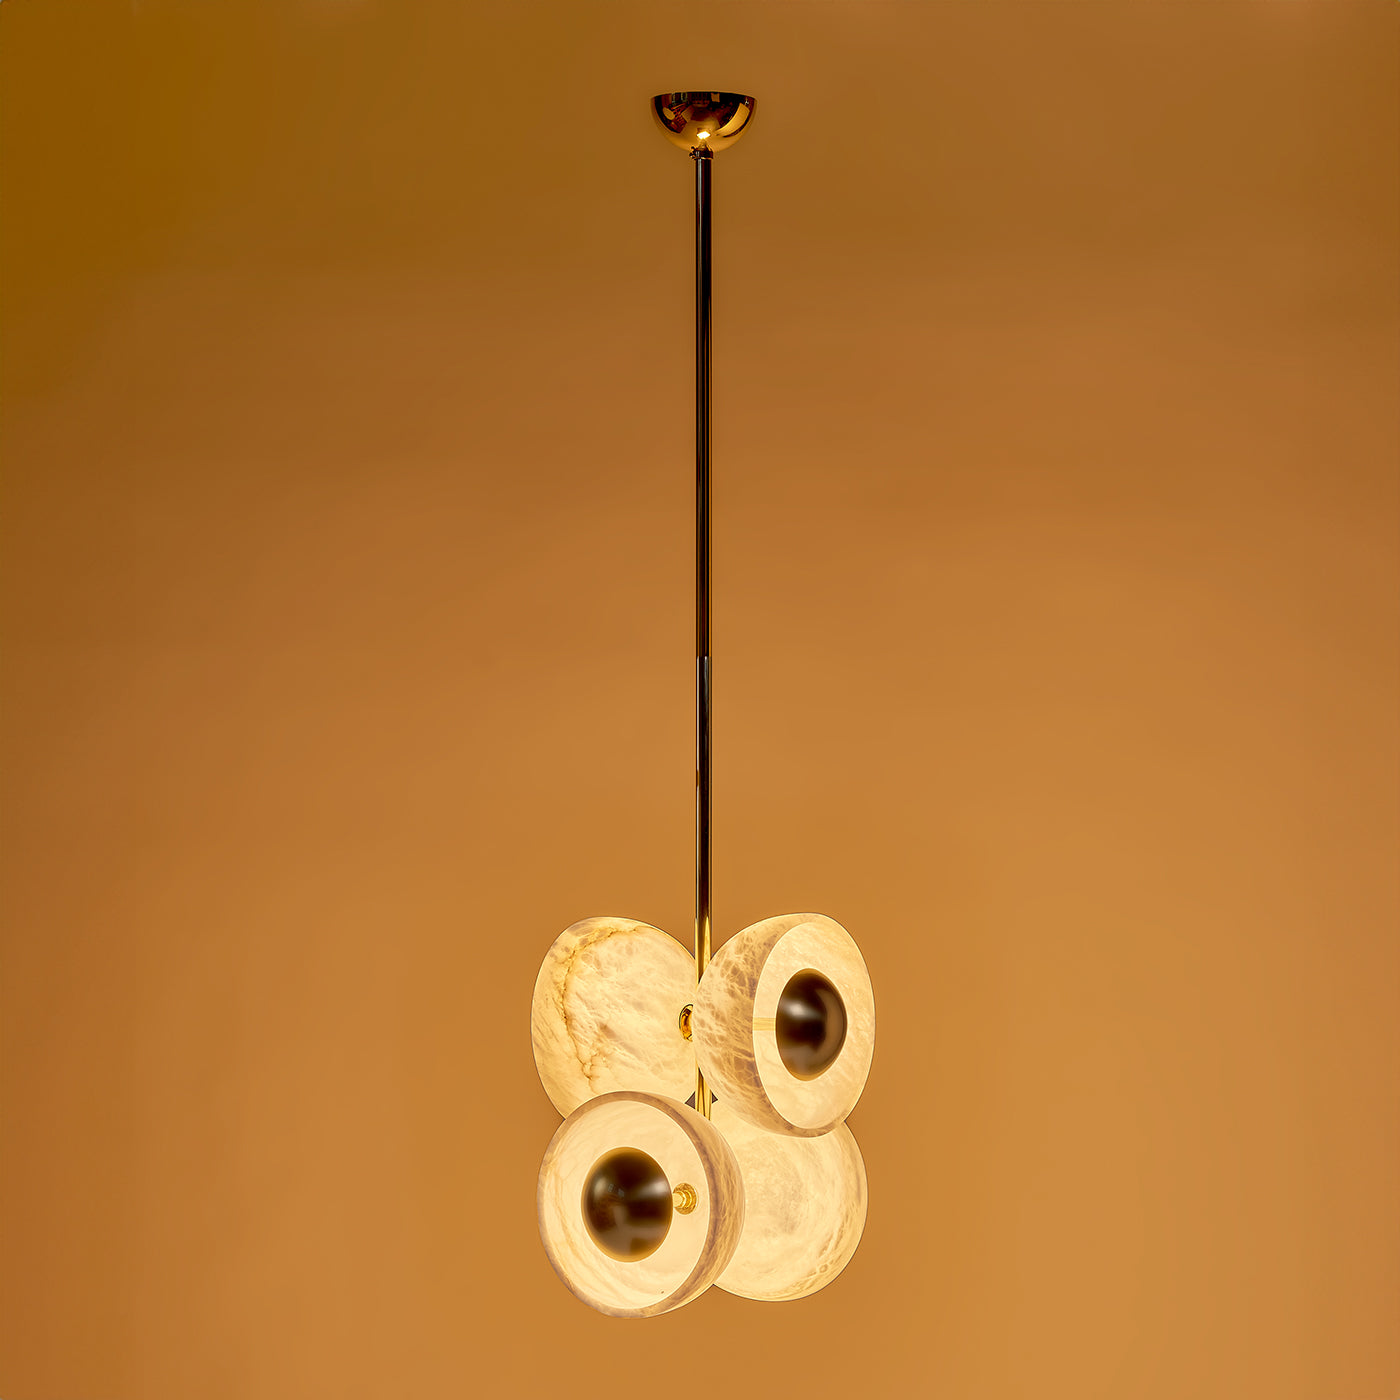 "Butterfly" Pendant Lamp in Polished Brass and Alabaster - Alternative view 2